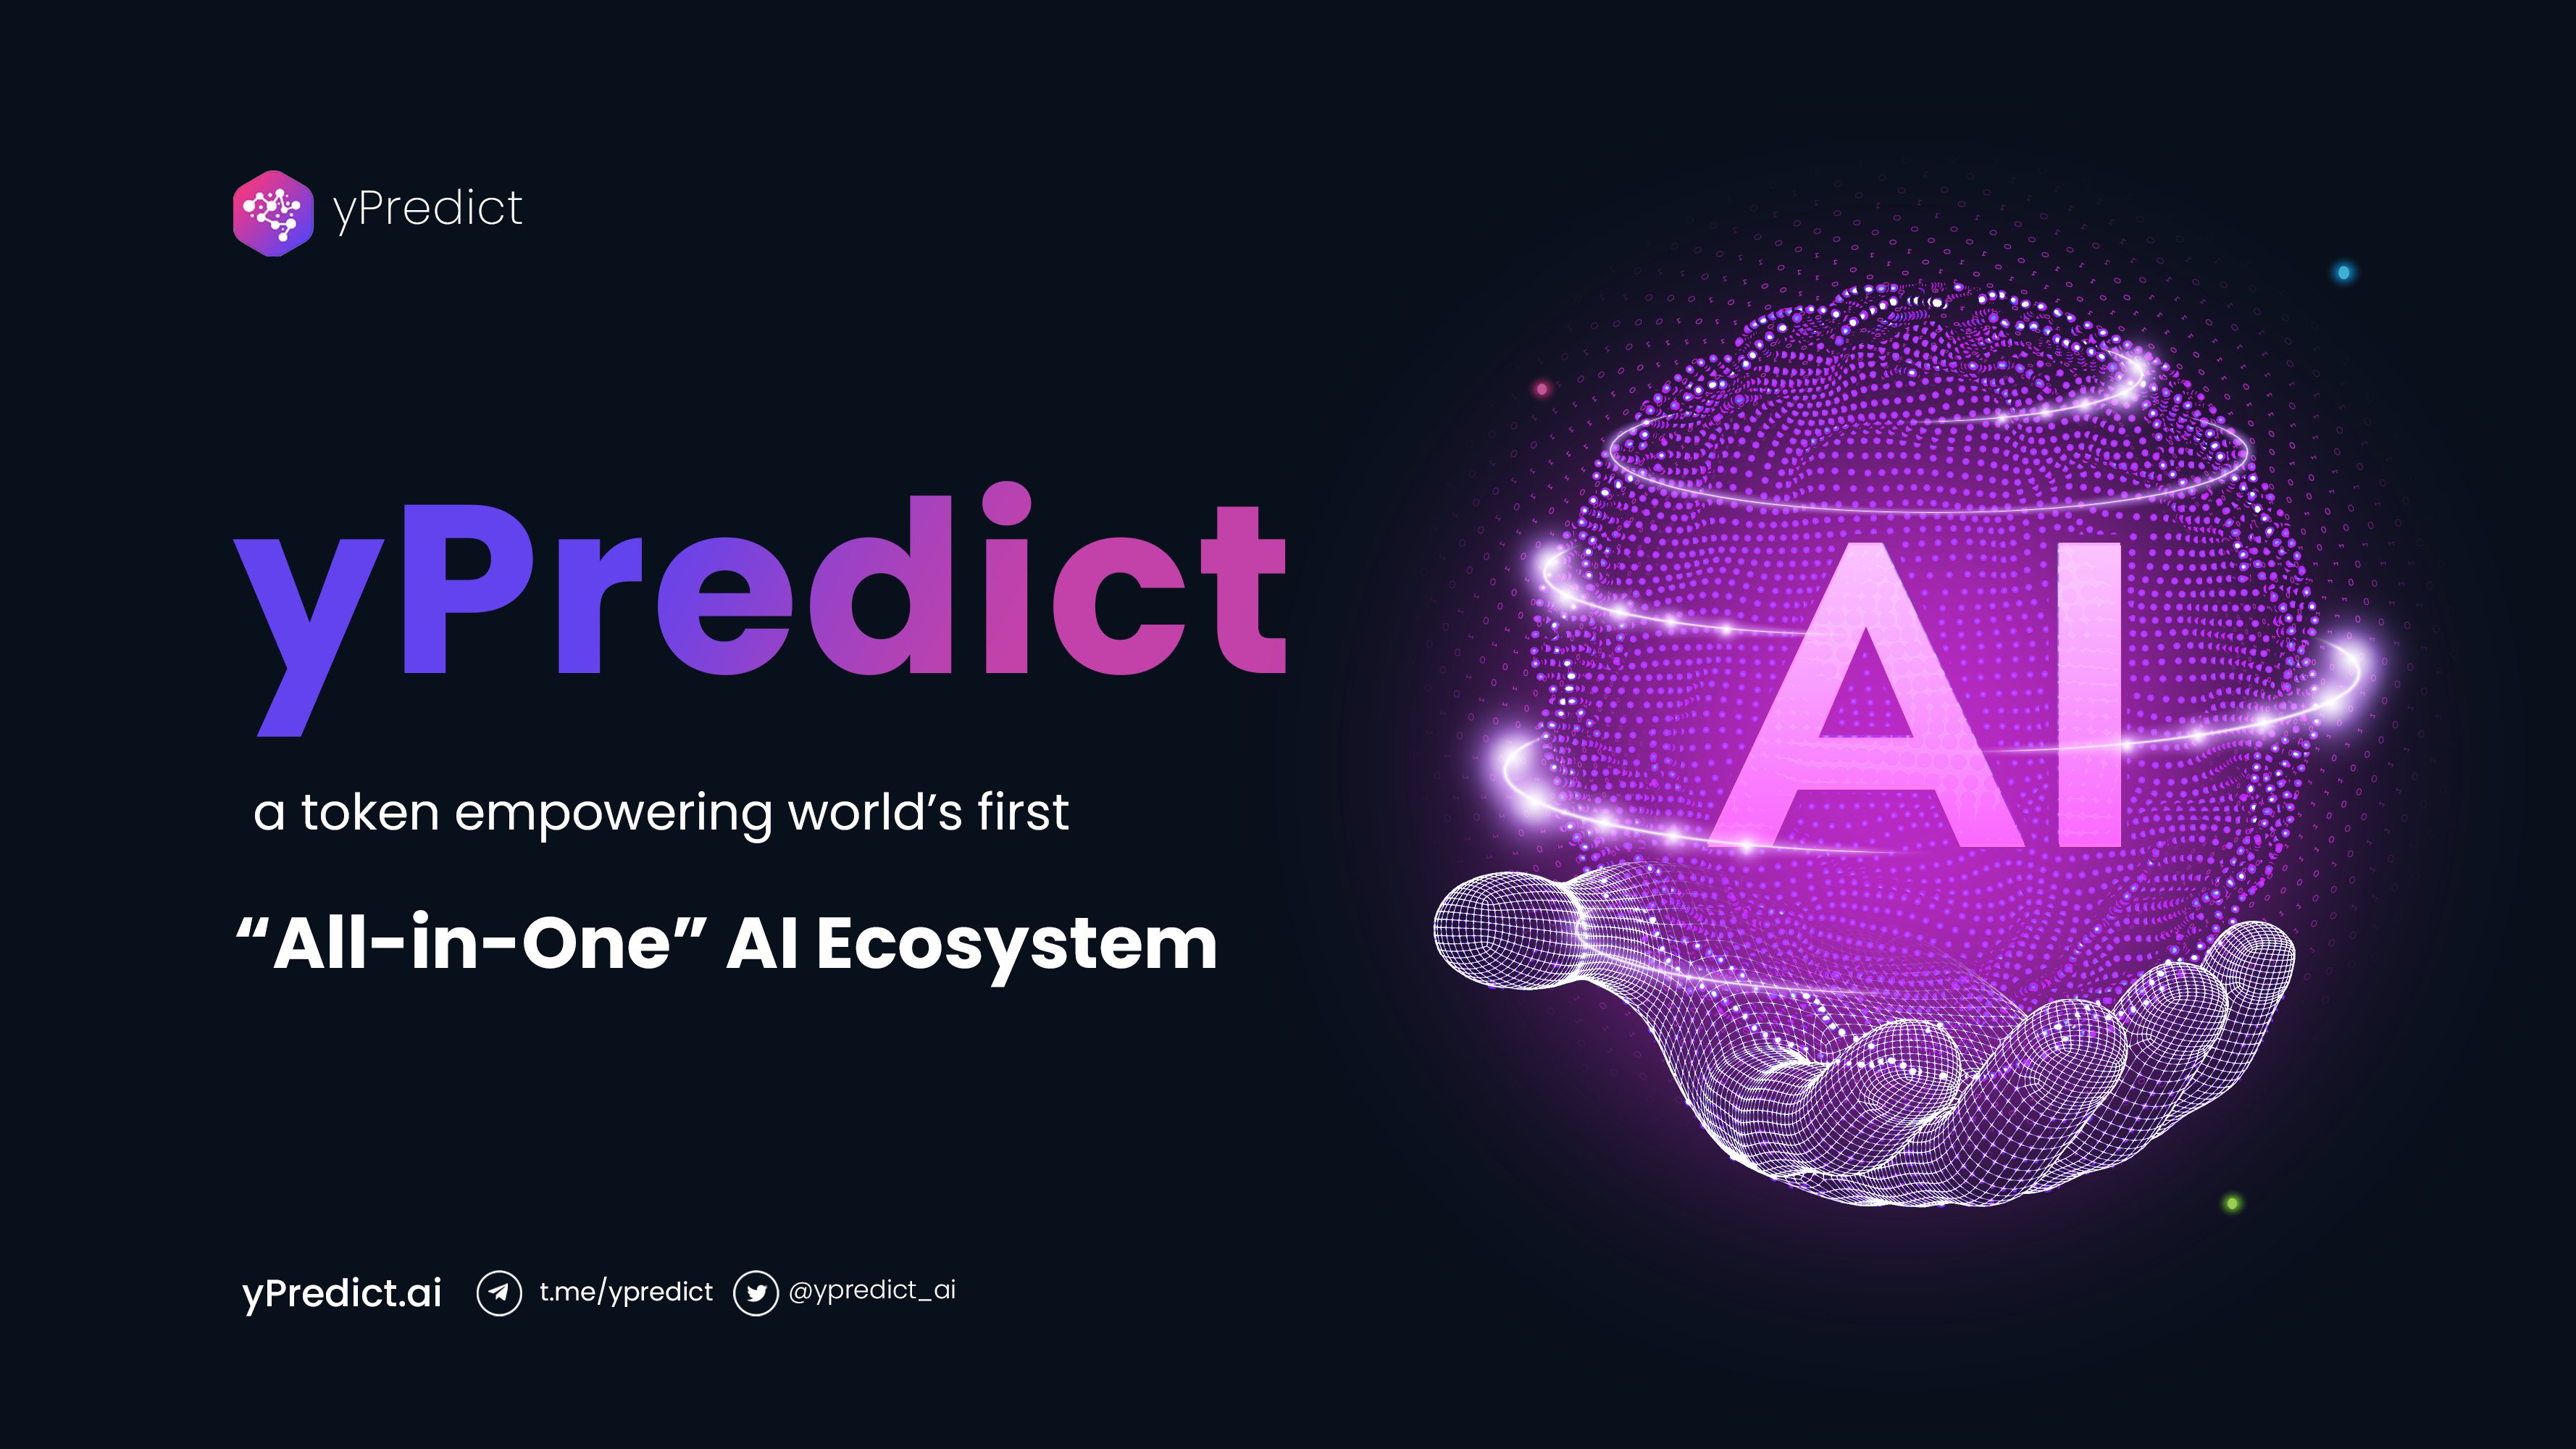 Image of yPredict Twitter post, the crypto presale is still ongoing.